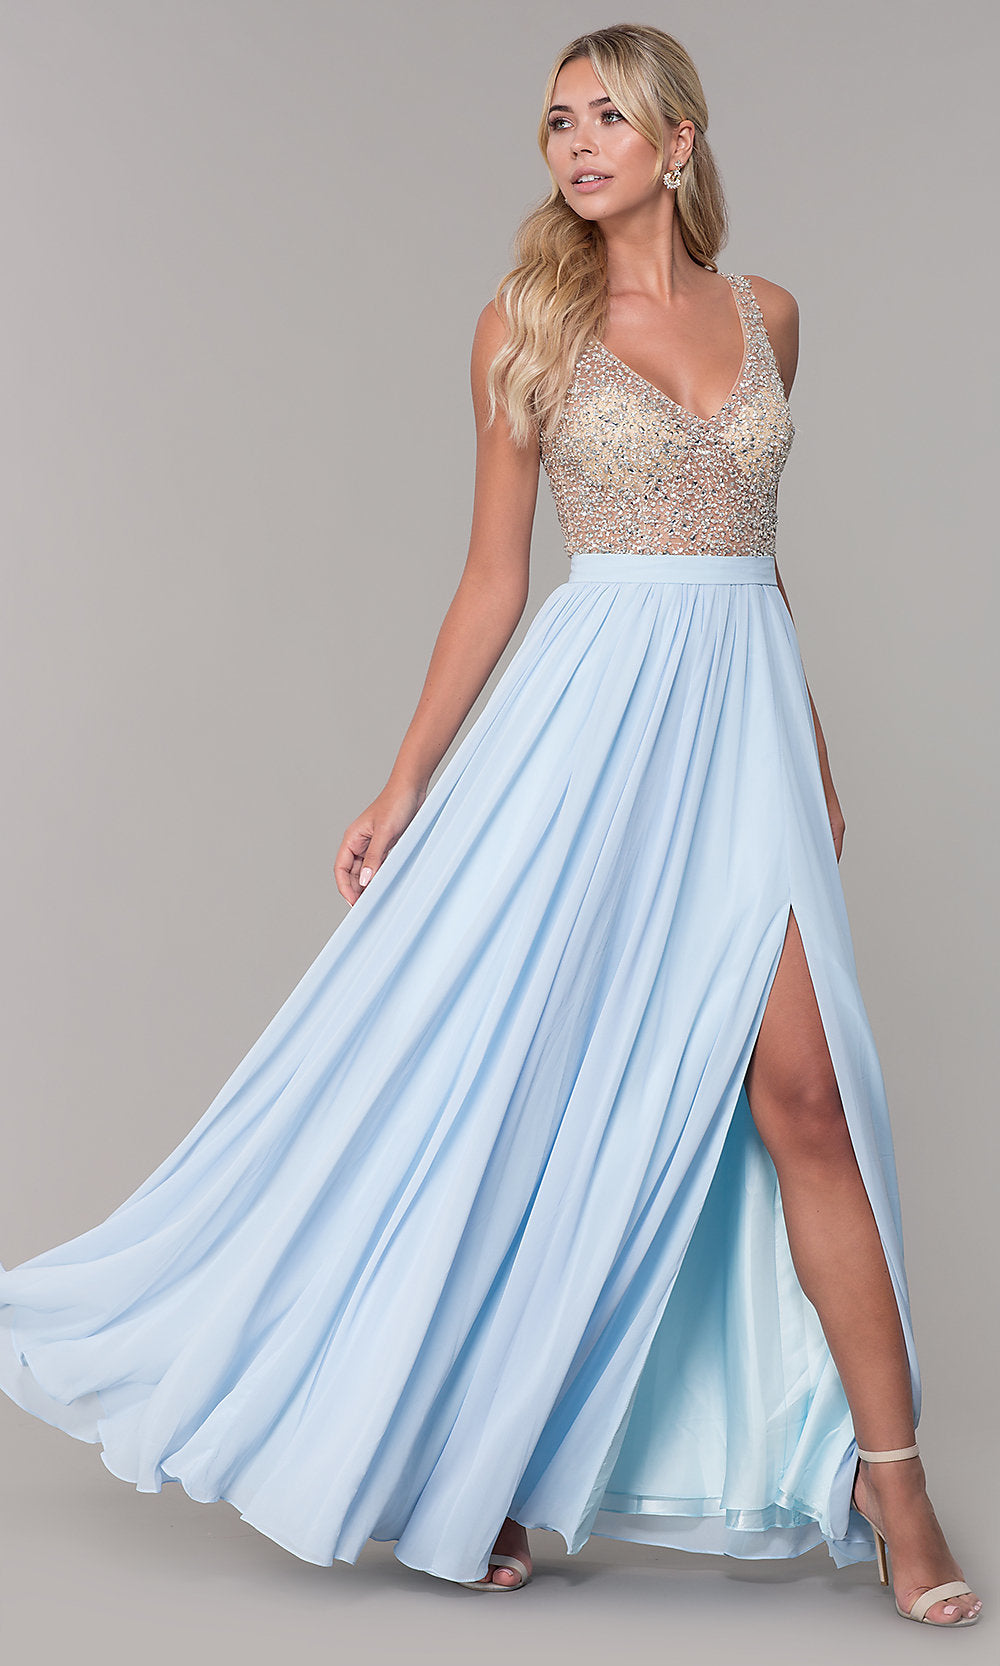 Periwinkle Beaded-Bodice Long Chiffon Formal Dress for Prom